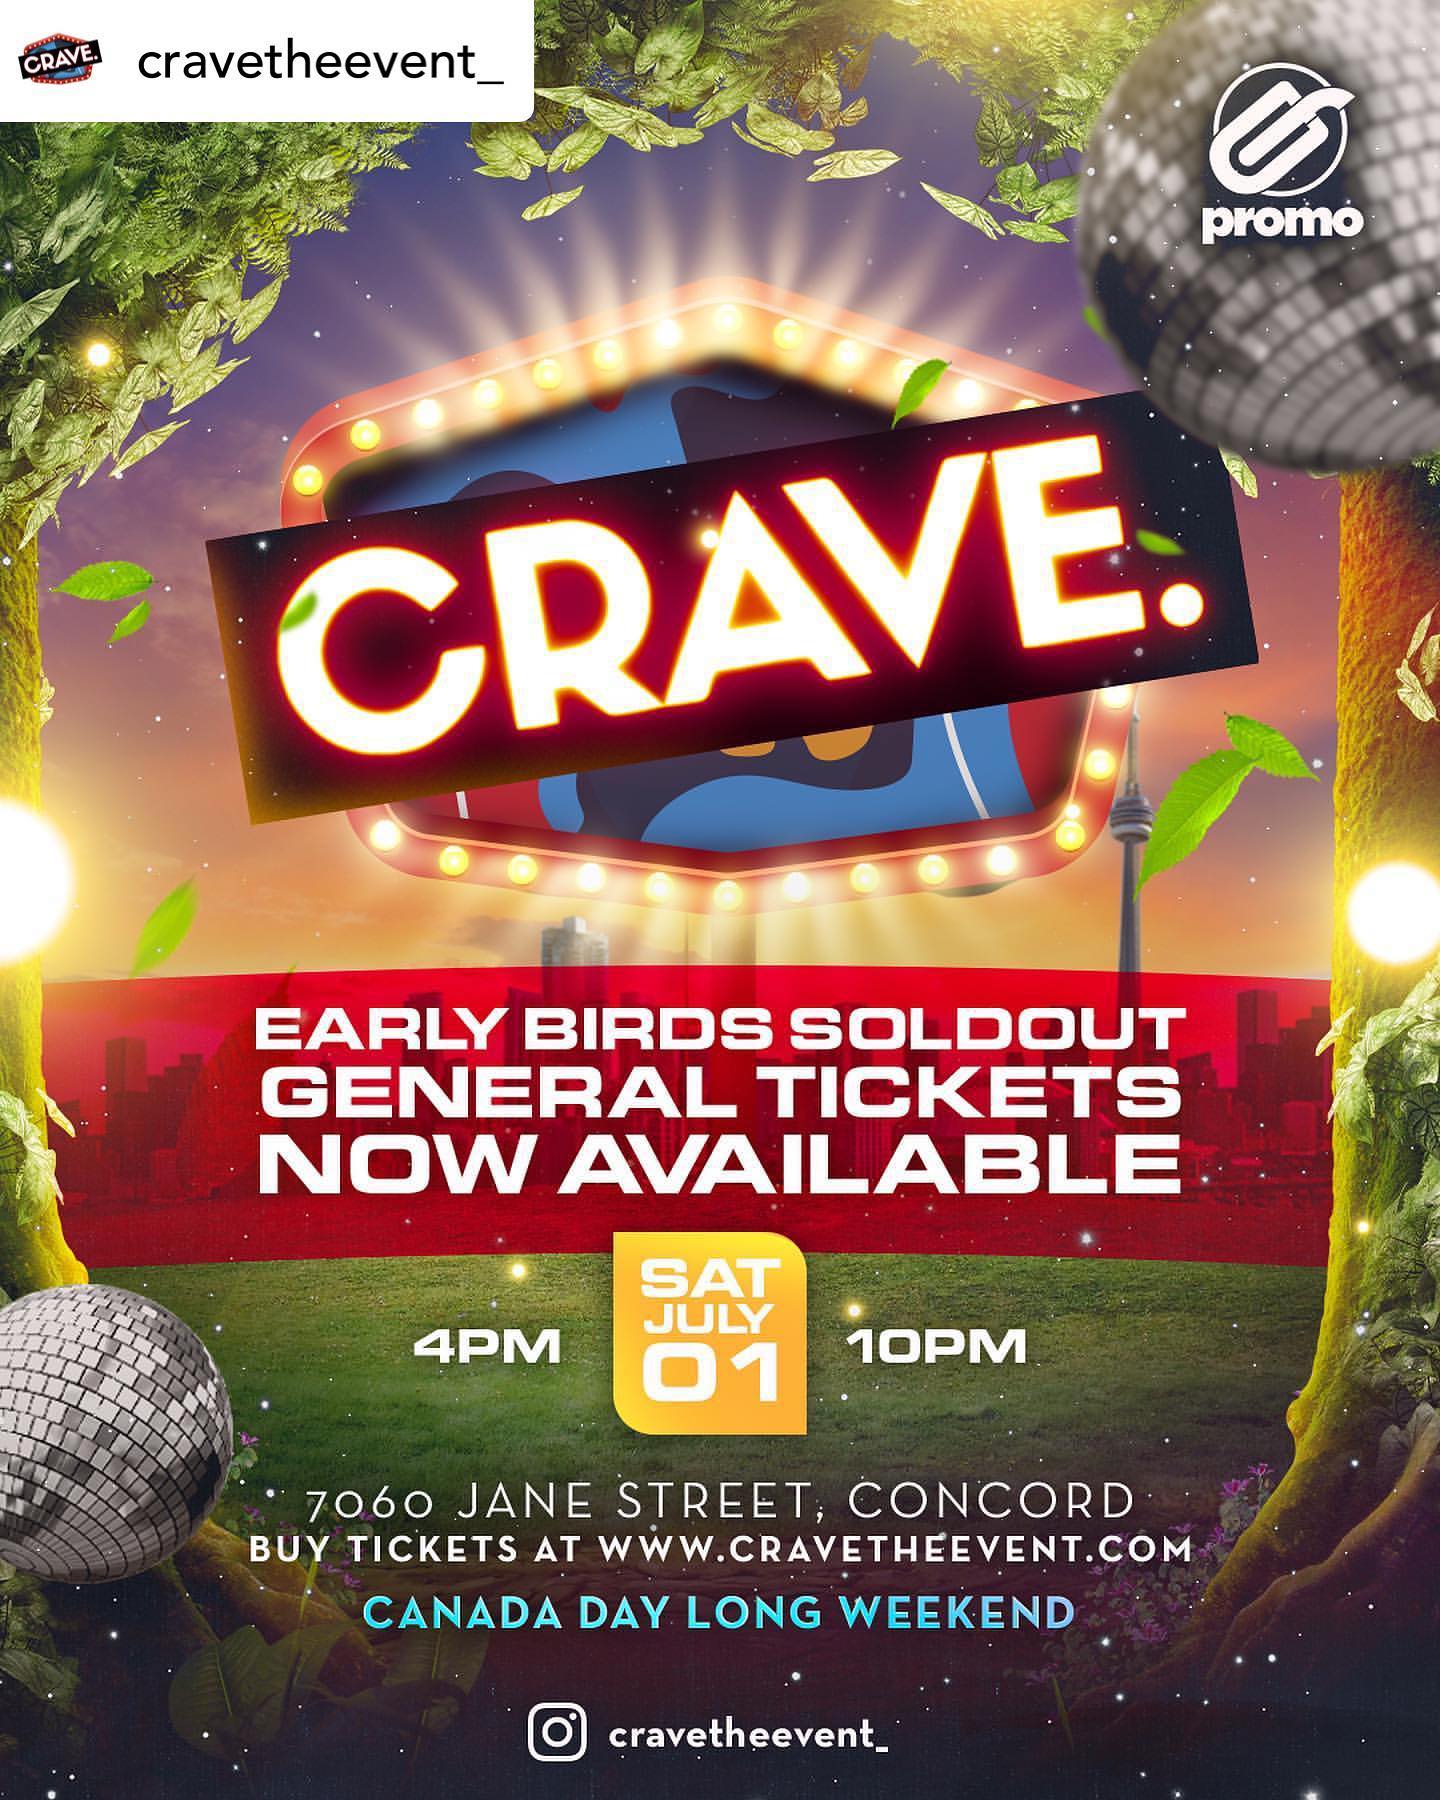 CRAVE - General admission tickets out now!
.
*Post intended for a 19+ year old audience. Please drink responsibly. 
.
.
.

@cravetheevent_ Toronto’s Premium Food & Drinks All-Inclusive event takes place on Saturday, July 1st, 2023 Canada Day Long Weekend.

Our new venue will be transformed into a fantasy electric ️garden, serving the best food and sophisticated drink offerings.

CRAVE continues to be Toronto’s Premium Food & Drinks All-Inclusive Event.

We’re excited to welcome all CRAVERS this CANADA DAY 🇨🇦 Long Weekend!

WHEN: Saturday, July 1st, 2023
TIME: 4:00pm - 10:00pm
WHERE: 7060 Jane Street, Concord (Vaughan)
PARKING: Free!

GENERAL ADMISSION TICKETS ON SALE NOW (click the link in our bio)
🔉🔉🔉Ticket prices will go  AGAIN!

We take the safety of our patrons very seriously. Our Bus 🚍 Pool will be available to everyone at various pick-up locations across the GTA so you can park, ride, party & drink responsibly for only $25/person return. 

To reserve your spot, simply purchase your seat at cravetheevent.com.

️️Secure your tickets before it's too late!

For info call: 416-451-8596